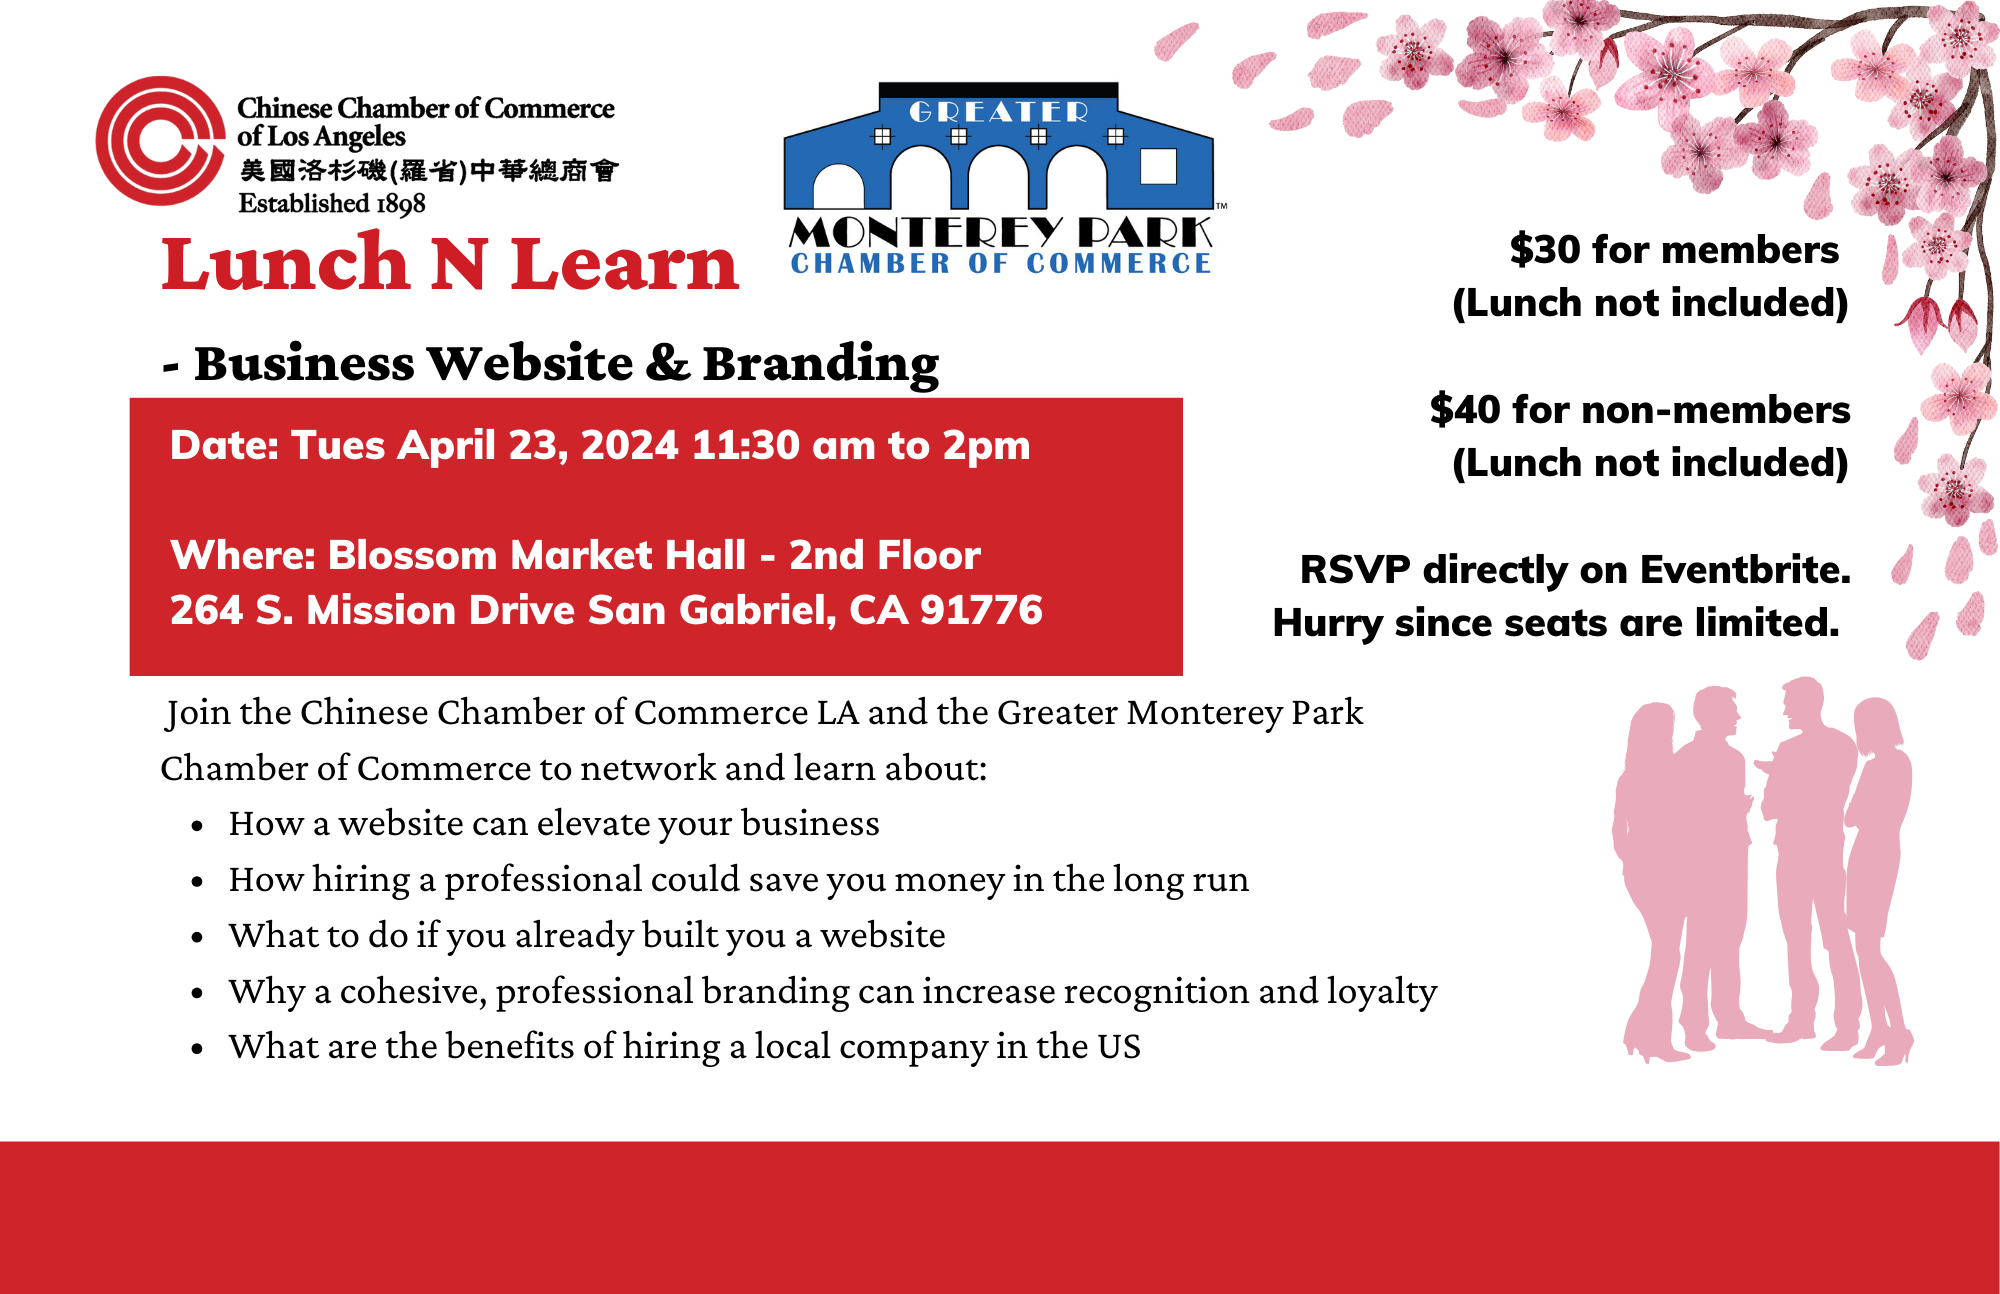 Copy of CCCLA Lunch and Learn Eventbrite flyer (4).png